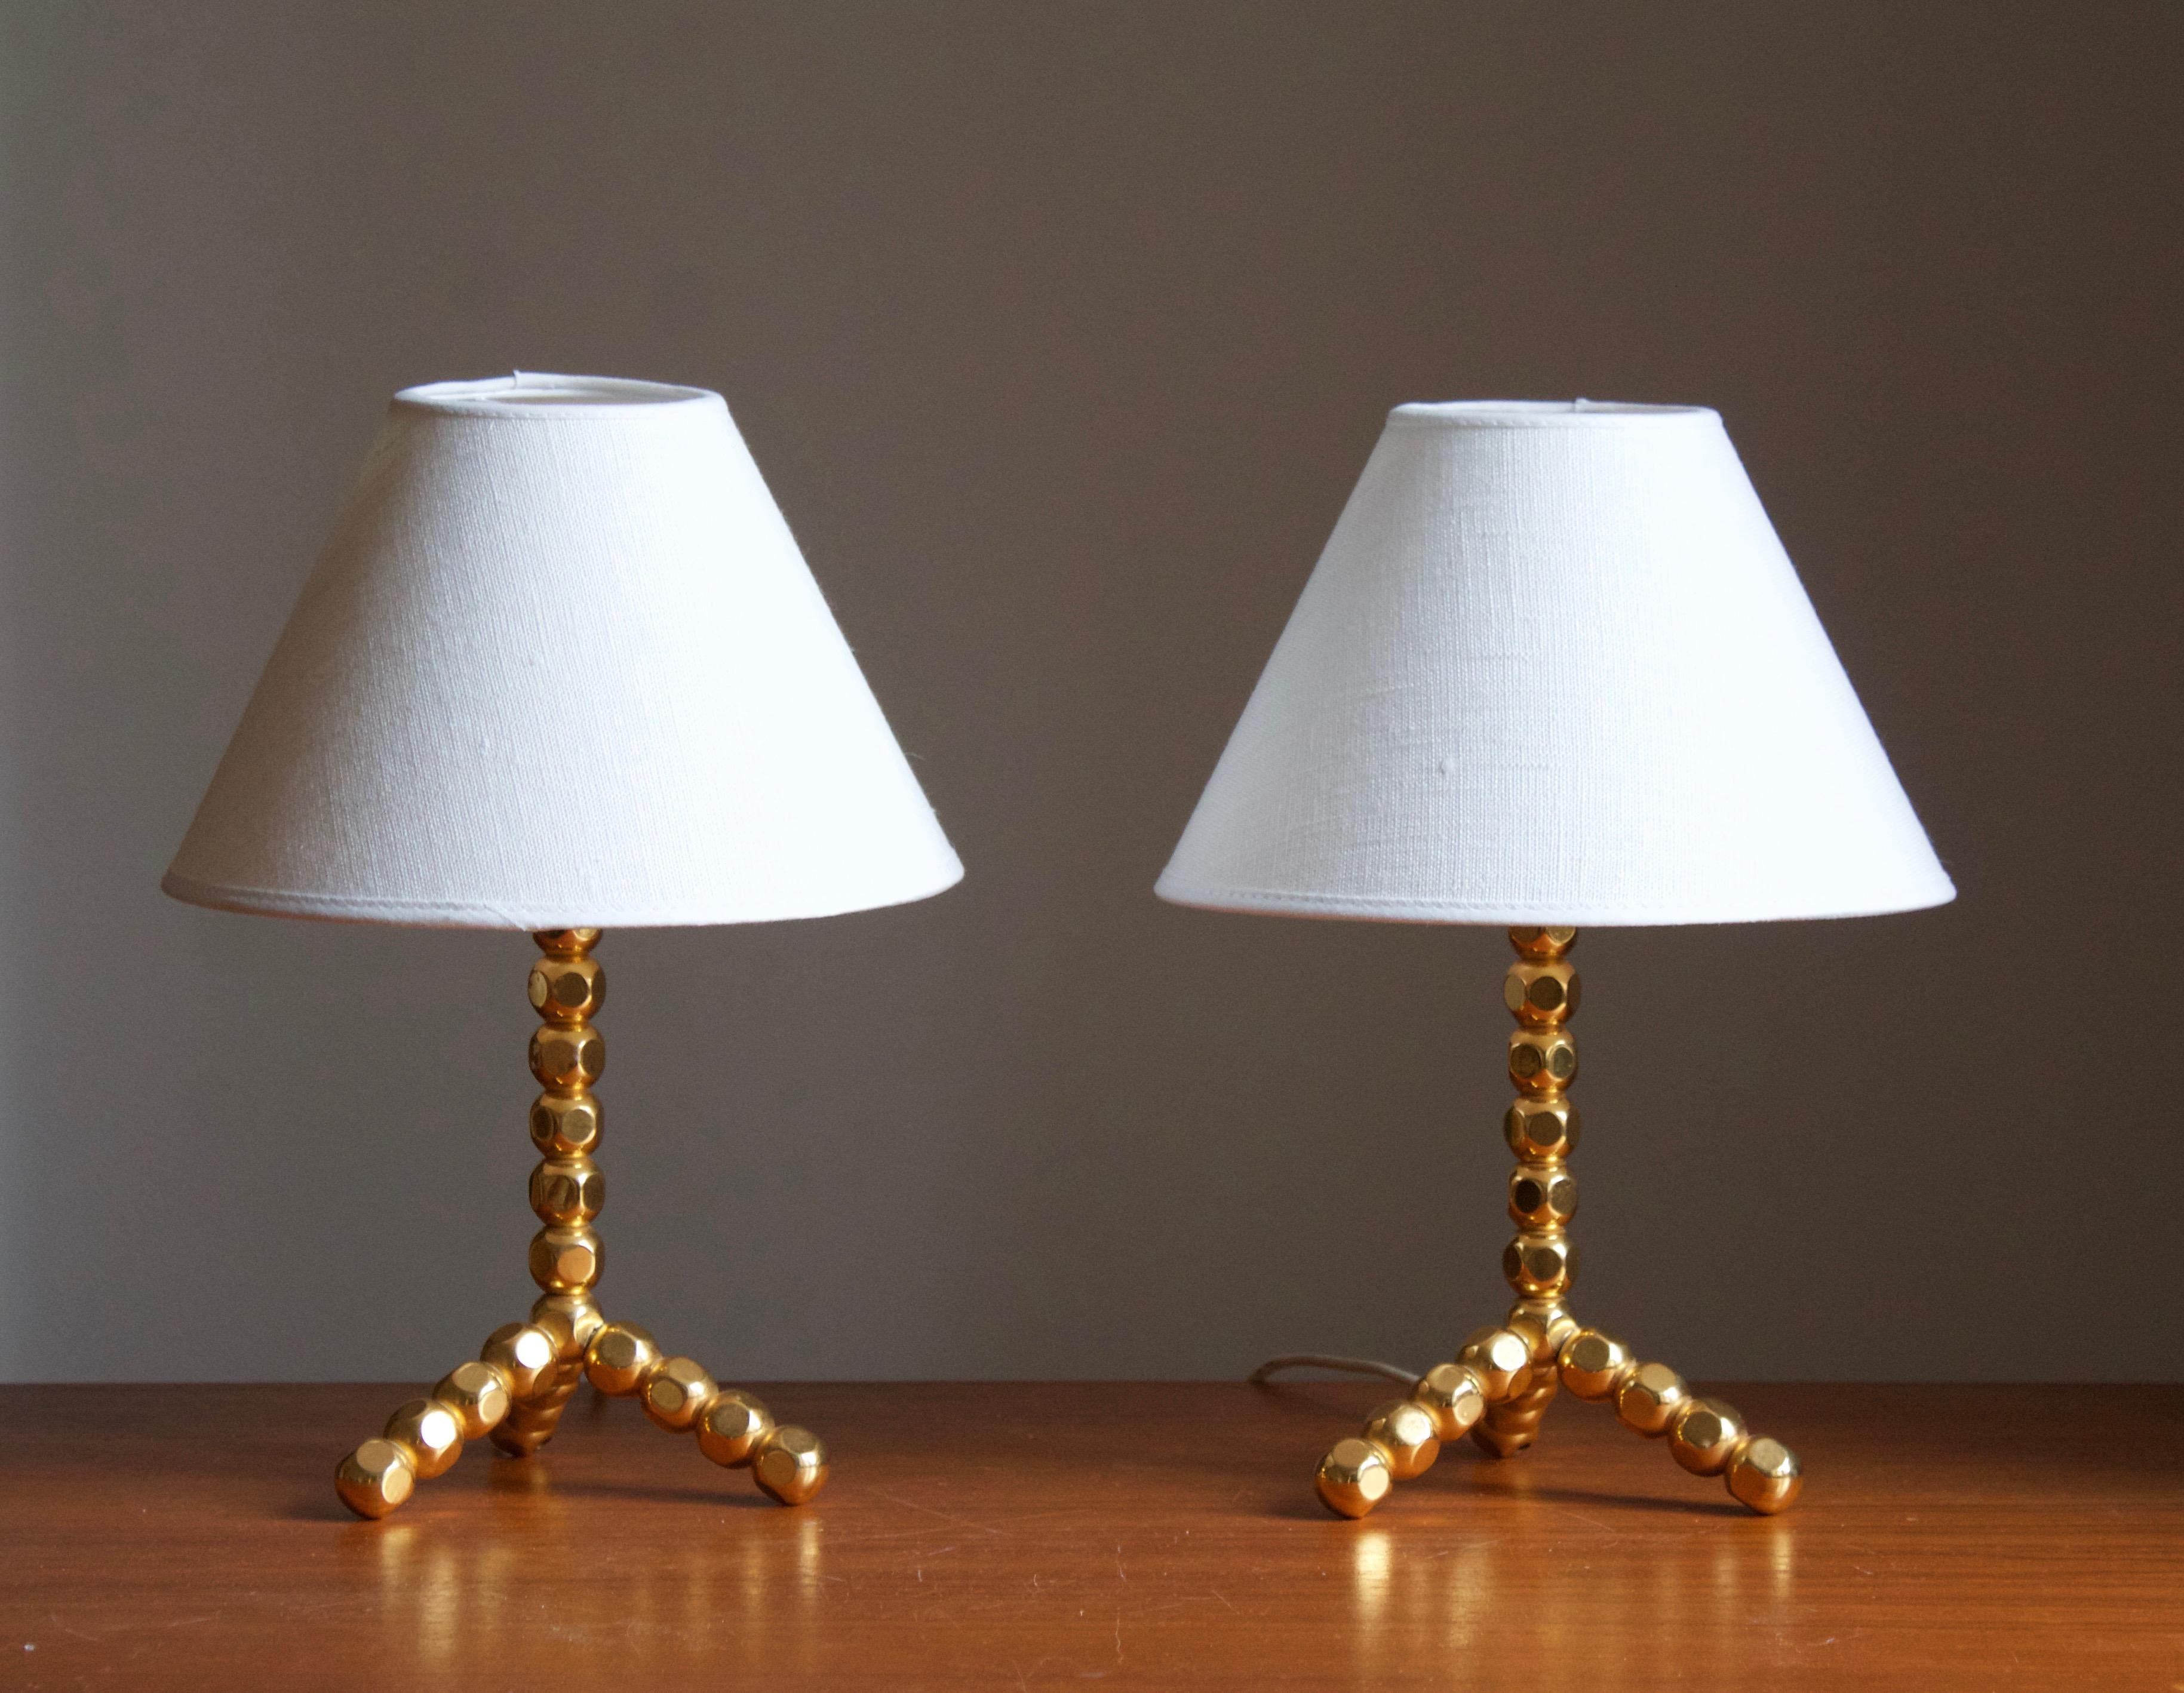 An adjustable table lamp / desk light, designed and produced in Sweden, circa 1960s-1970s. 

Stated dimensions exclude lampshade, height includes socket.